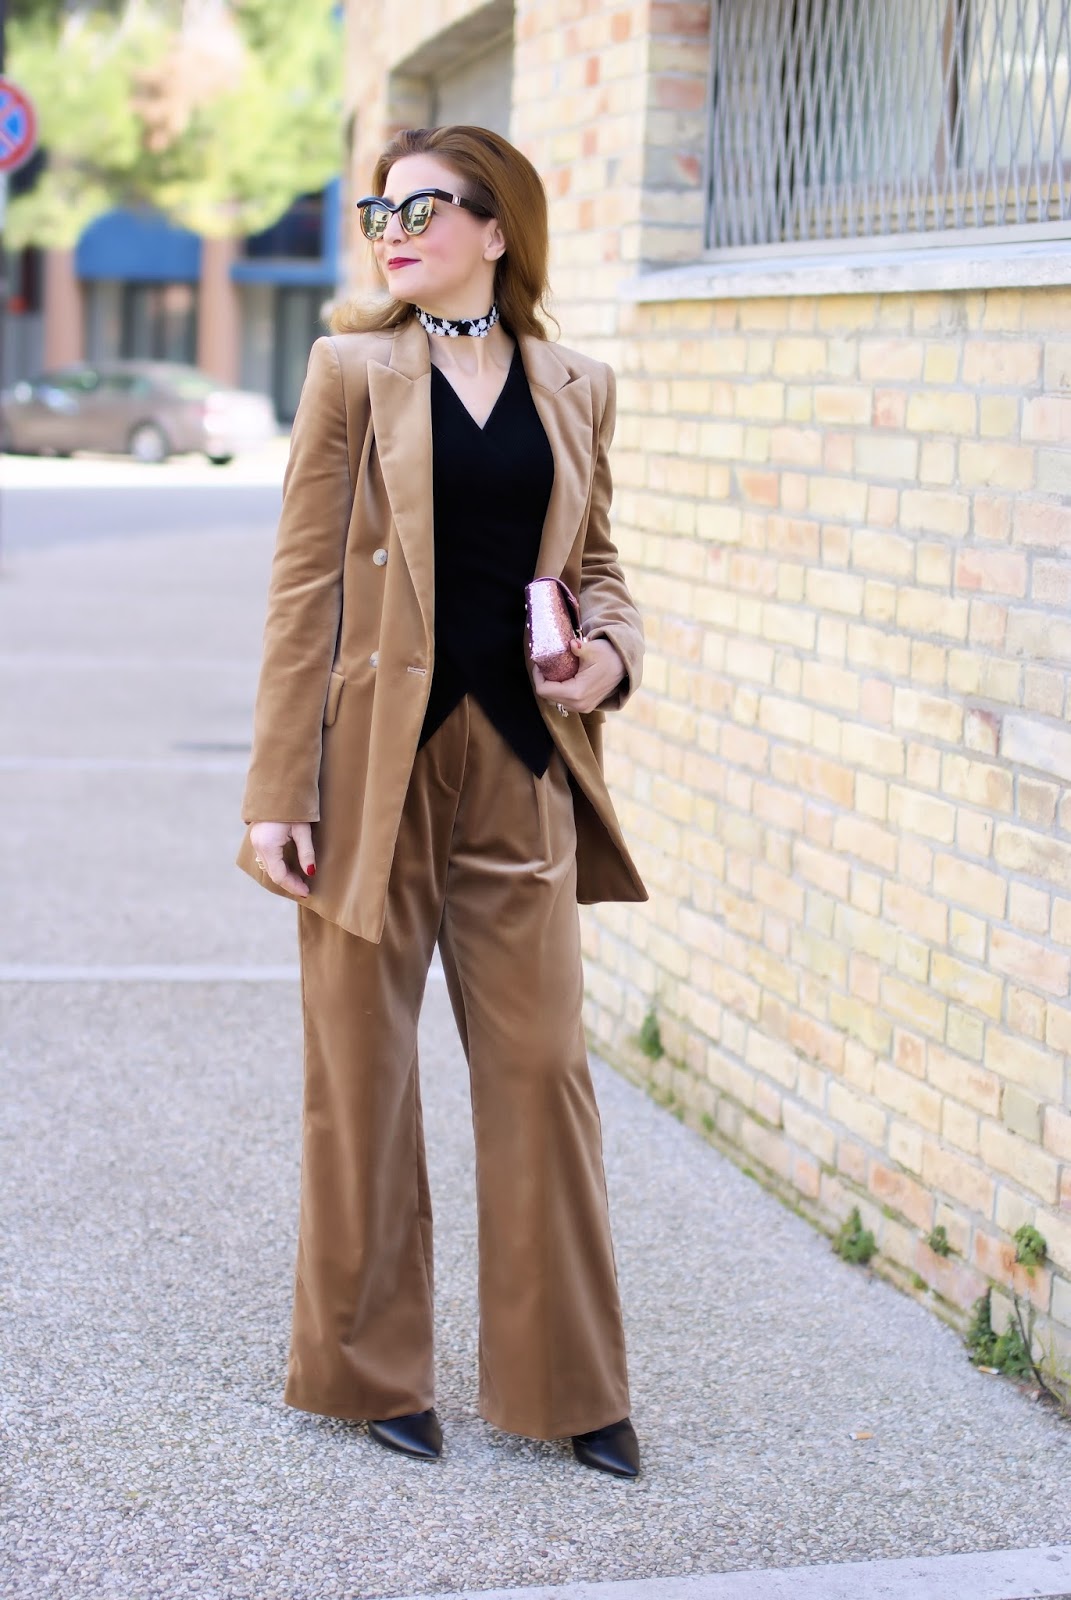 Max Mara velvet suit and RYinNYC lace choker on Fashion and Cookies fashion blog, fashion blogger style